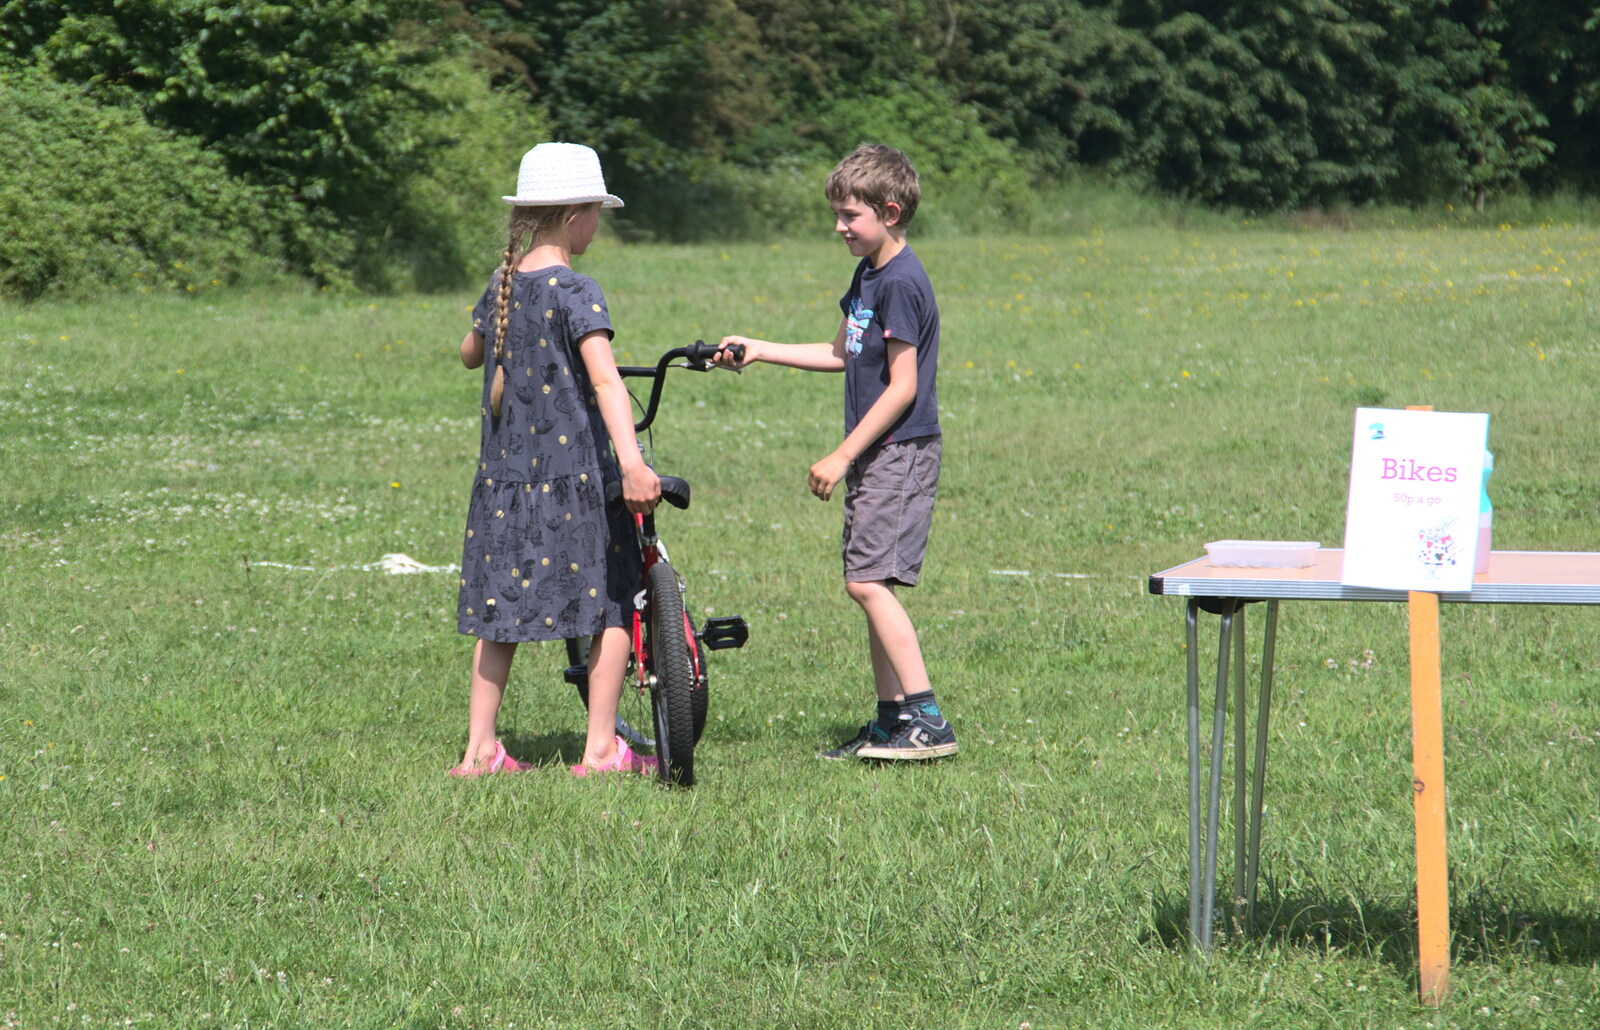 Fred talks to some girl from The Not-Opening of the Palgrave Playground, Palgrave, Suffolk - 3rd June 2018